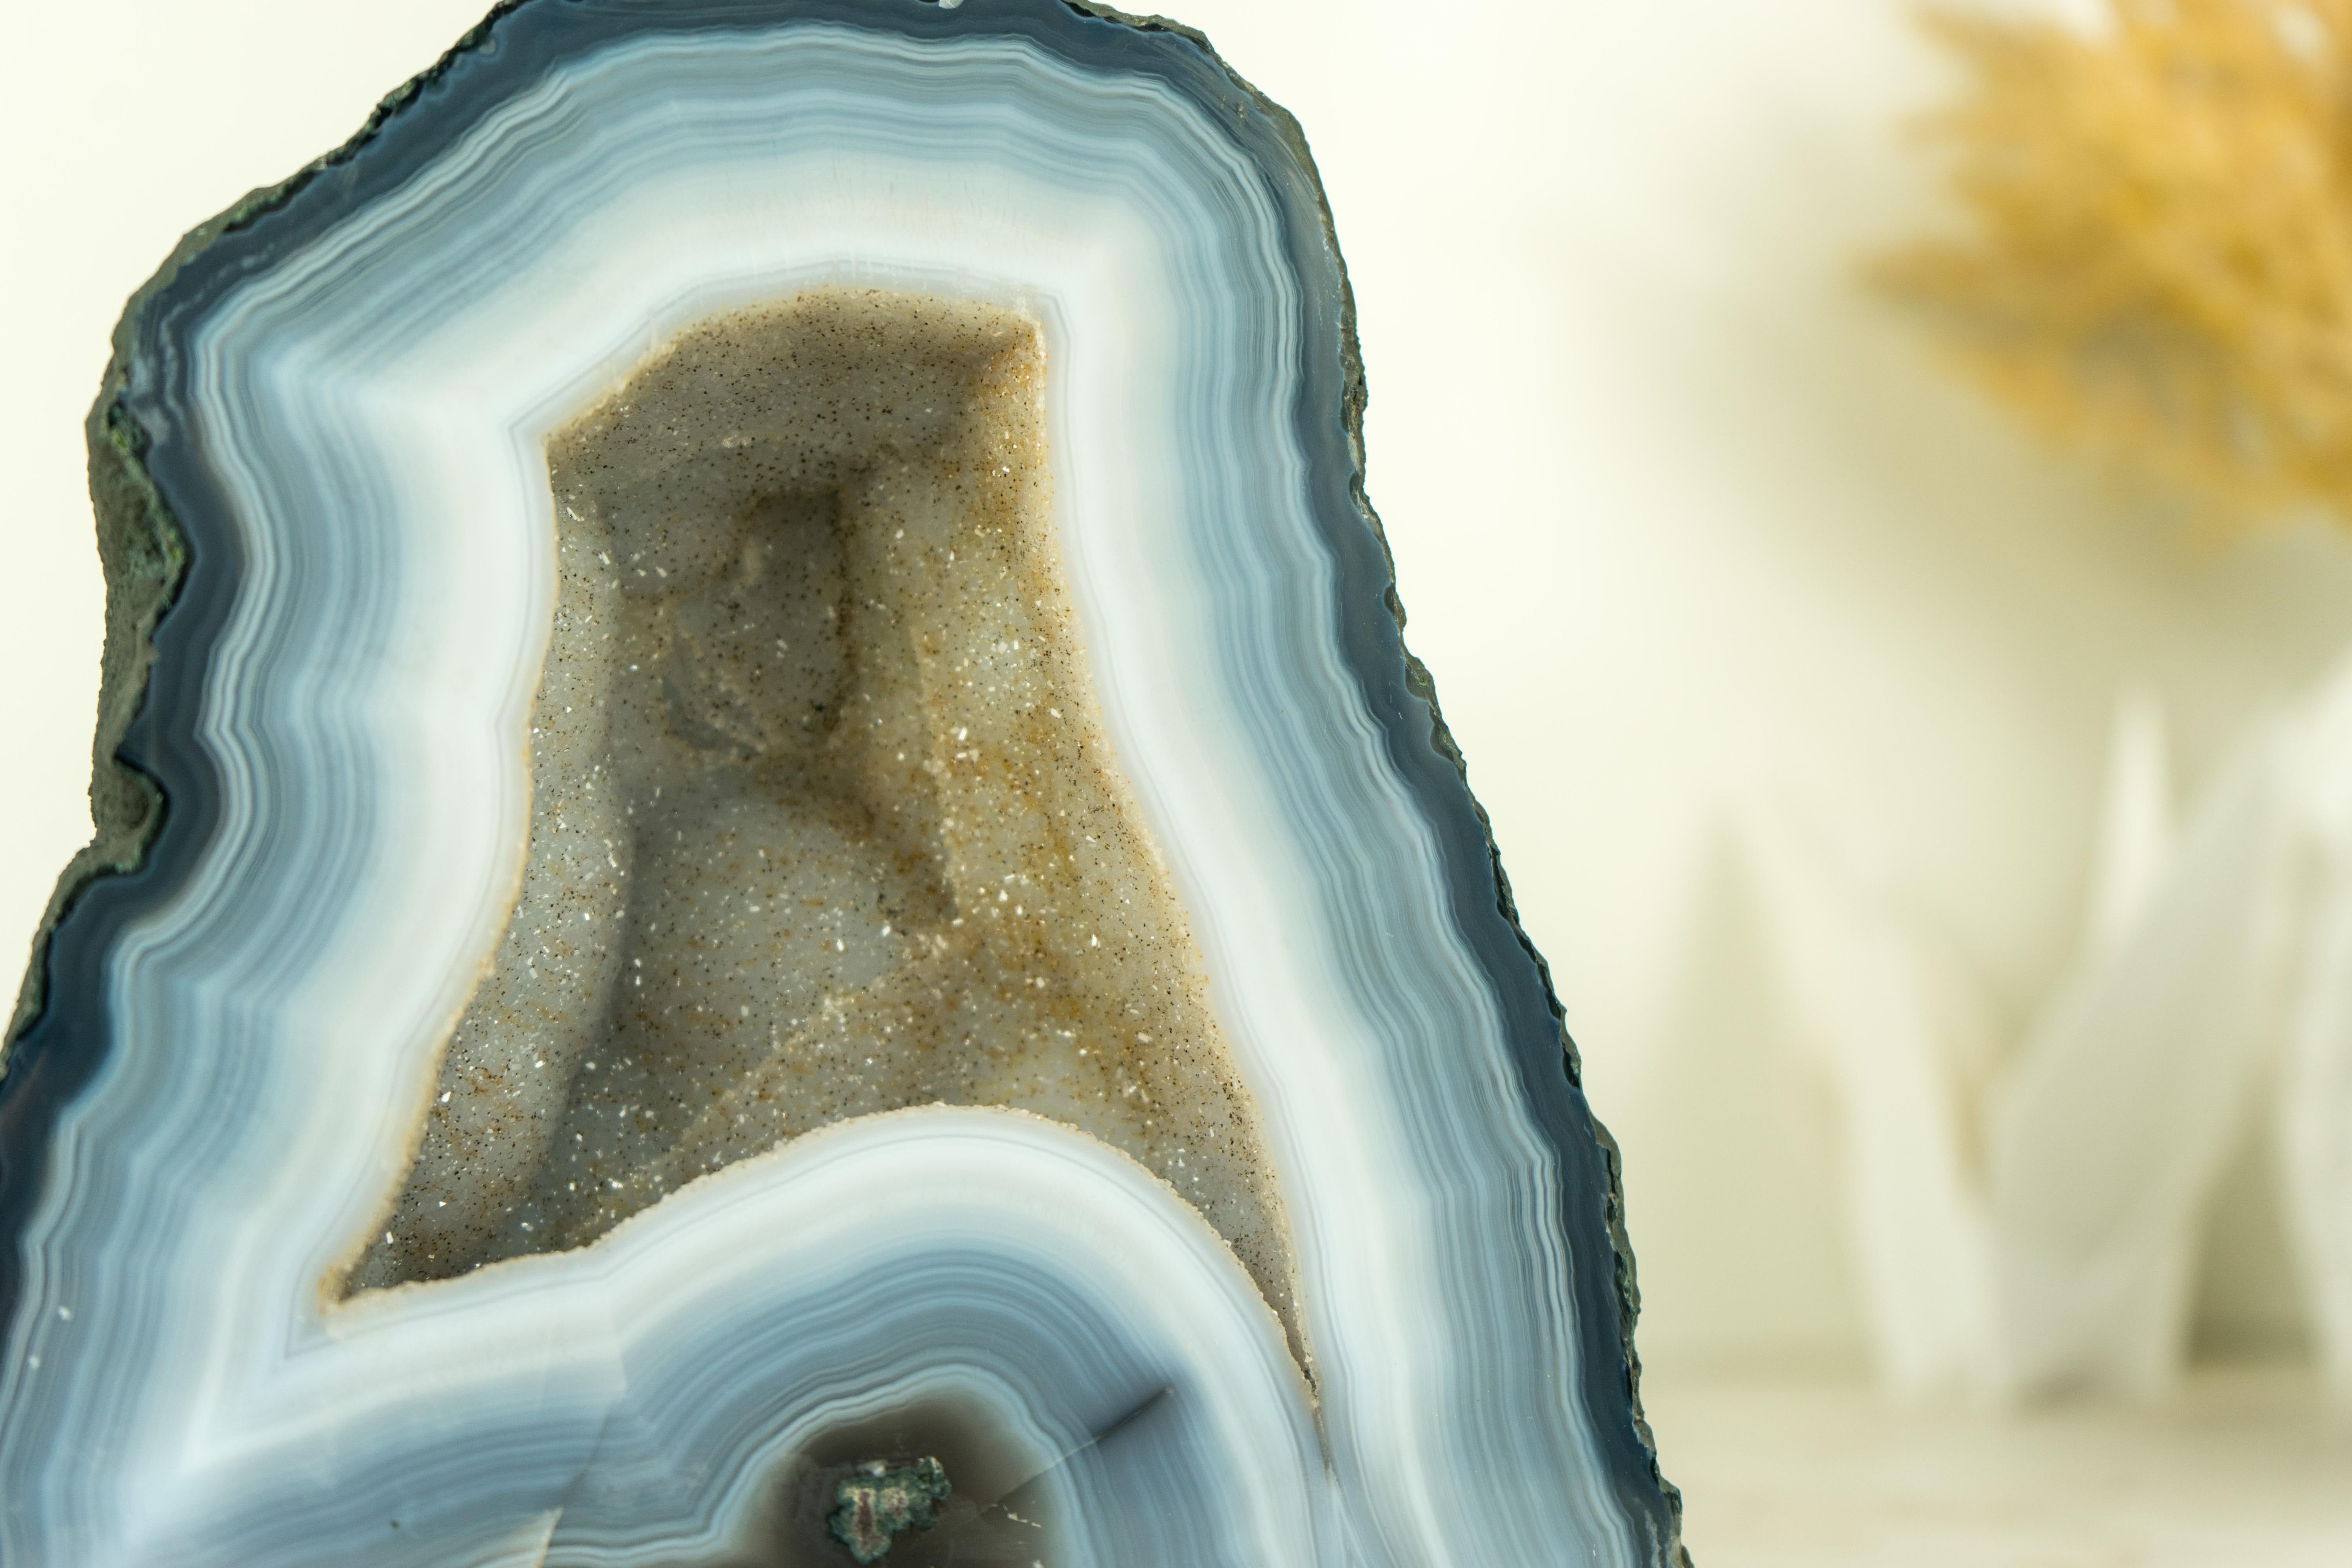 Small yet stunning, this Blue and White Lace Agate Geode brings numerous flawless natural agate laces, along with sparkly white galaxy crystals that form the beautiful aesthetics of the geode. It's undoubtedly a standout specimen for your space and